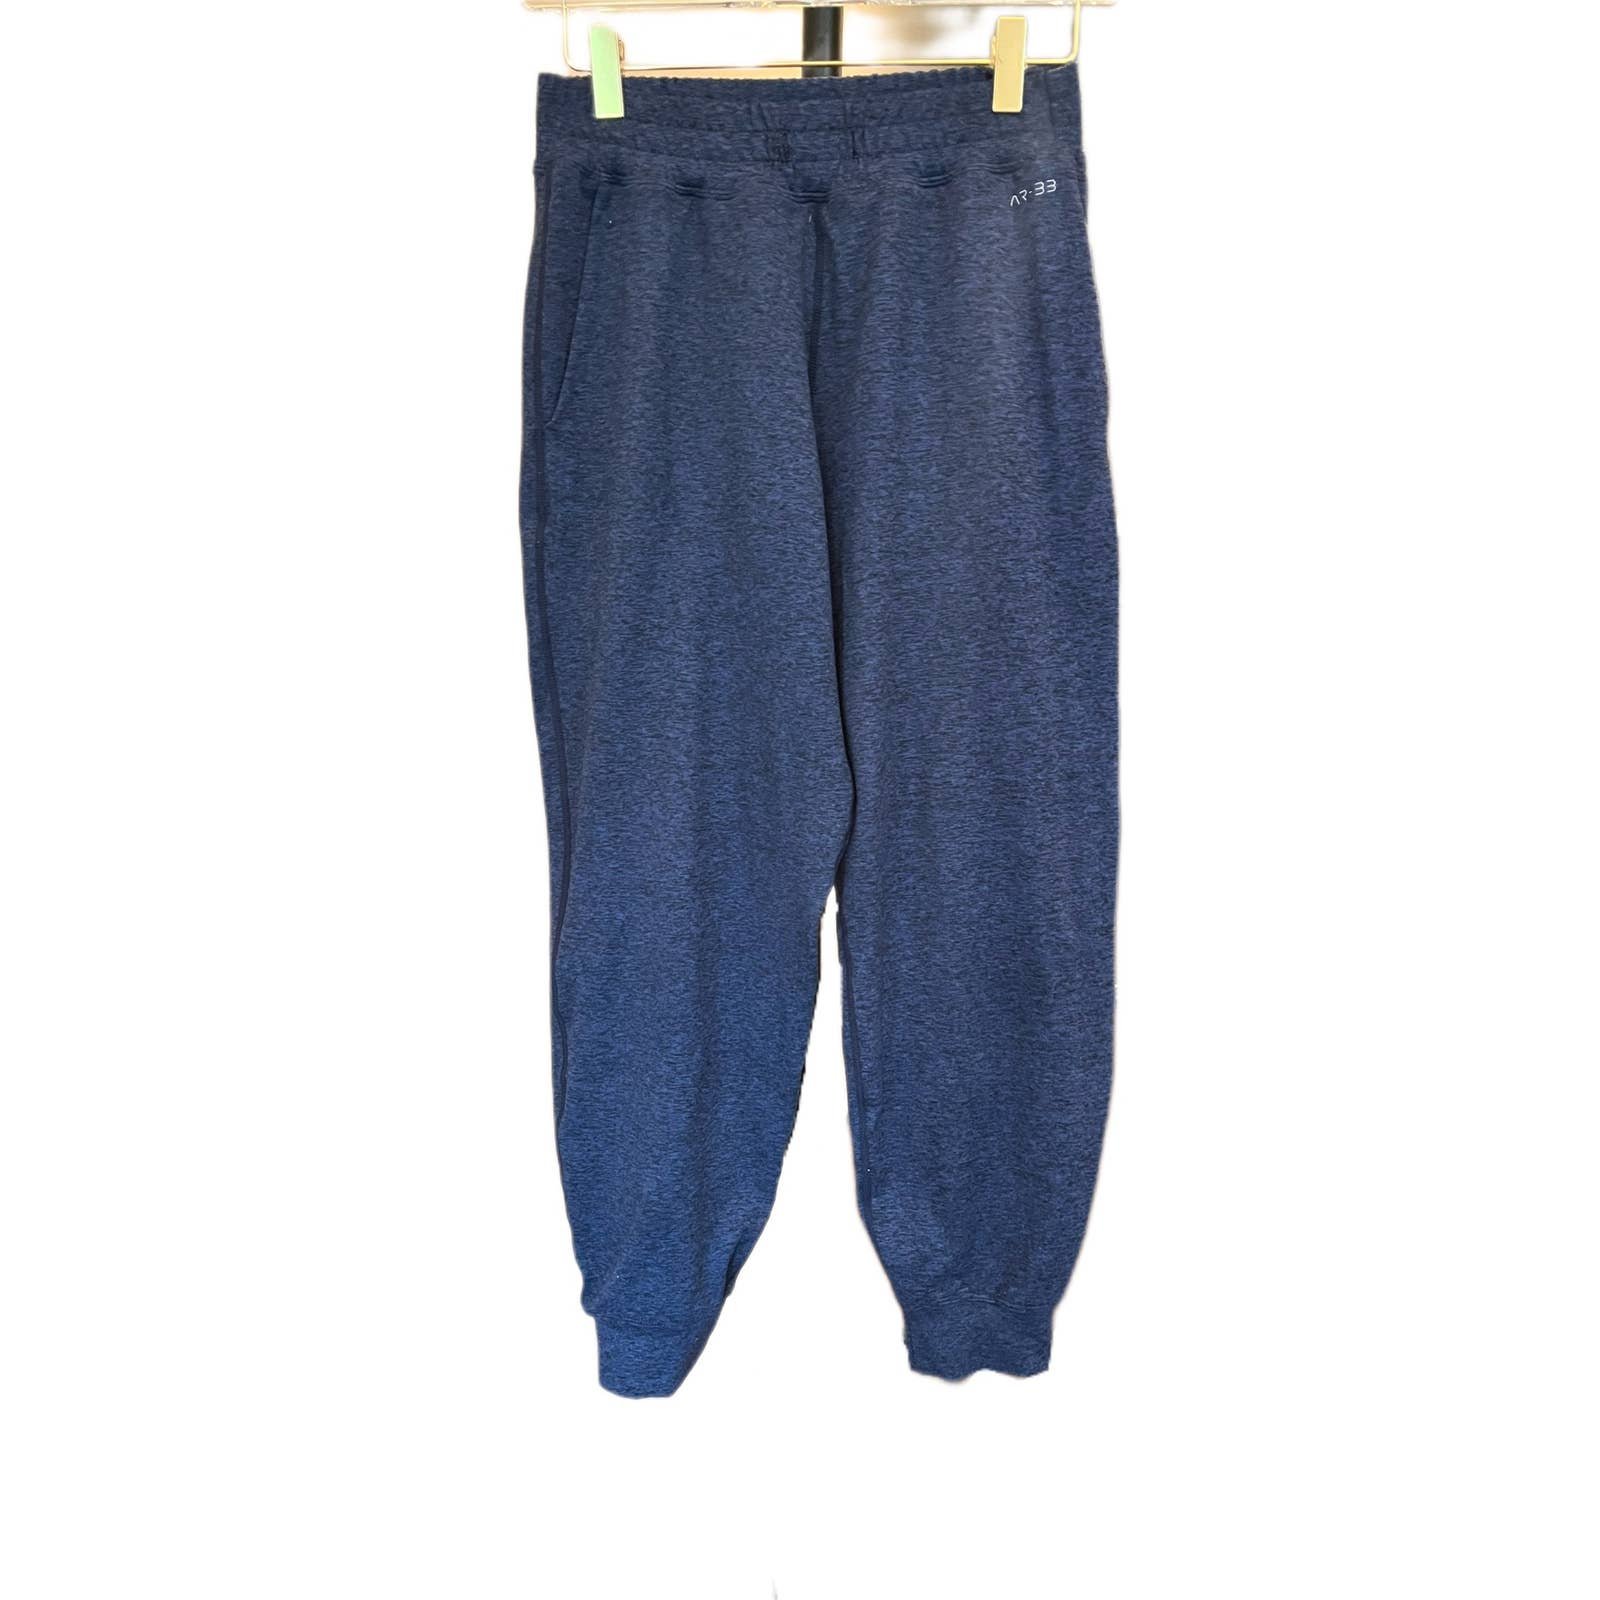 floor price AR-33 Heather Blue Joggers - size XS piy9Gg